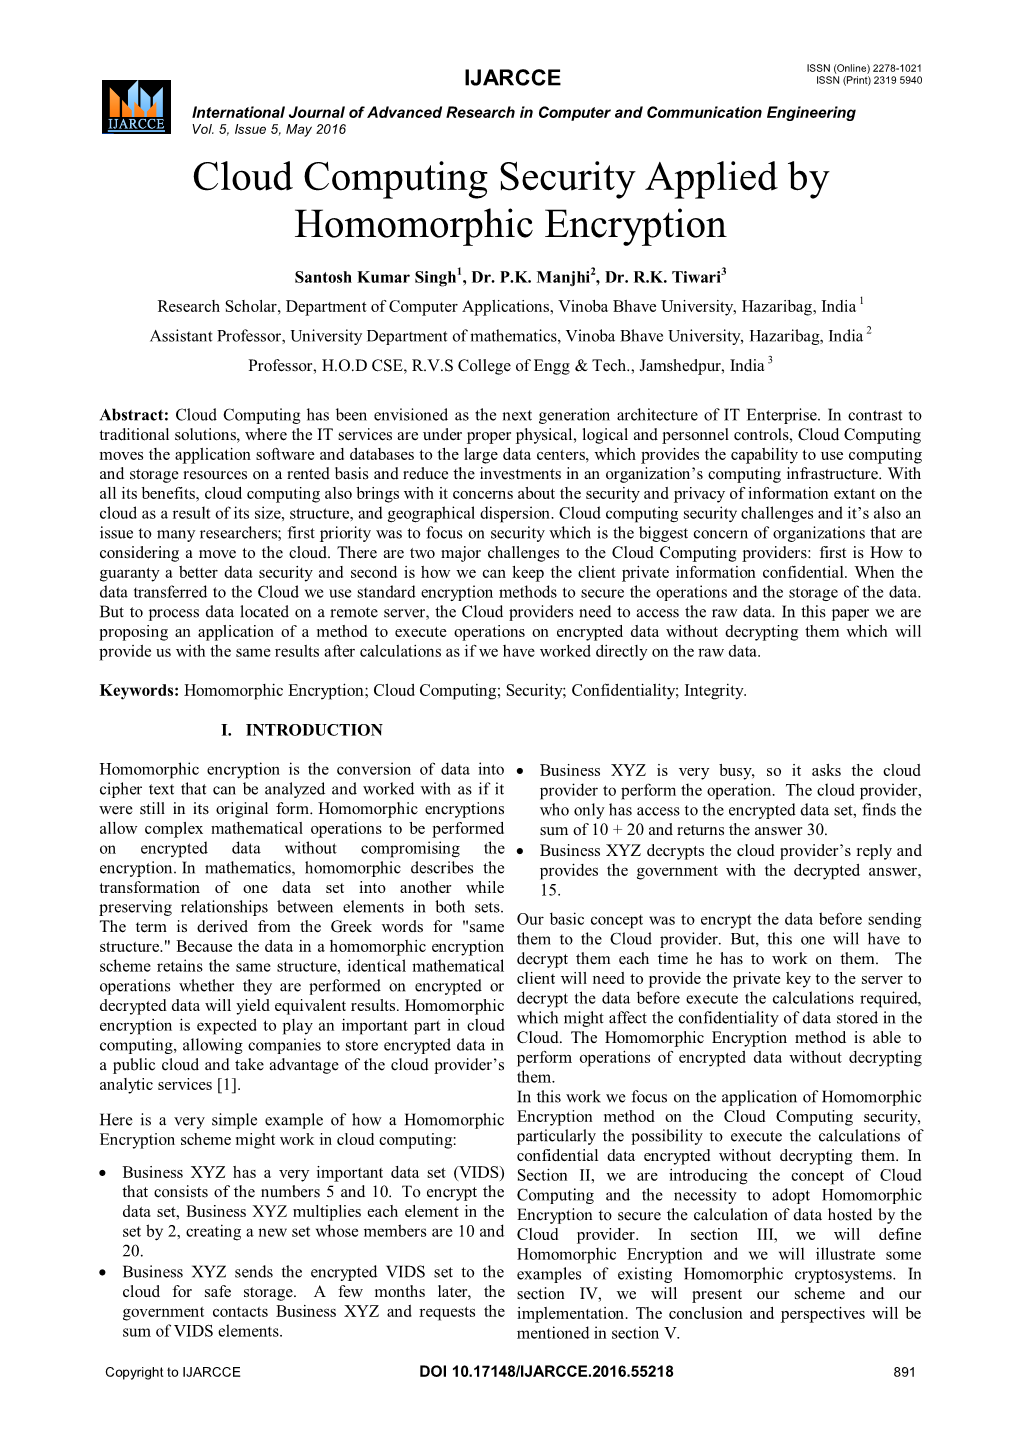 Cloud Computing Security Applied by Homomorphic Encryption